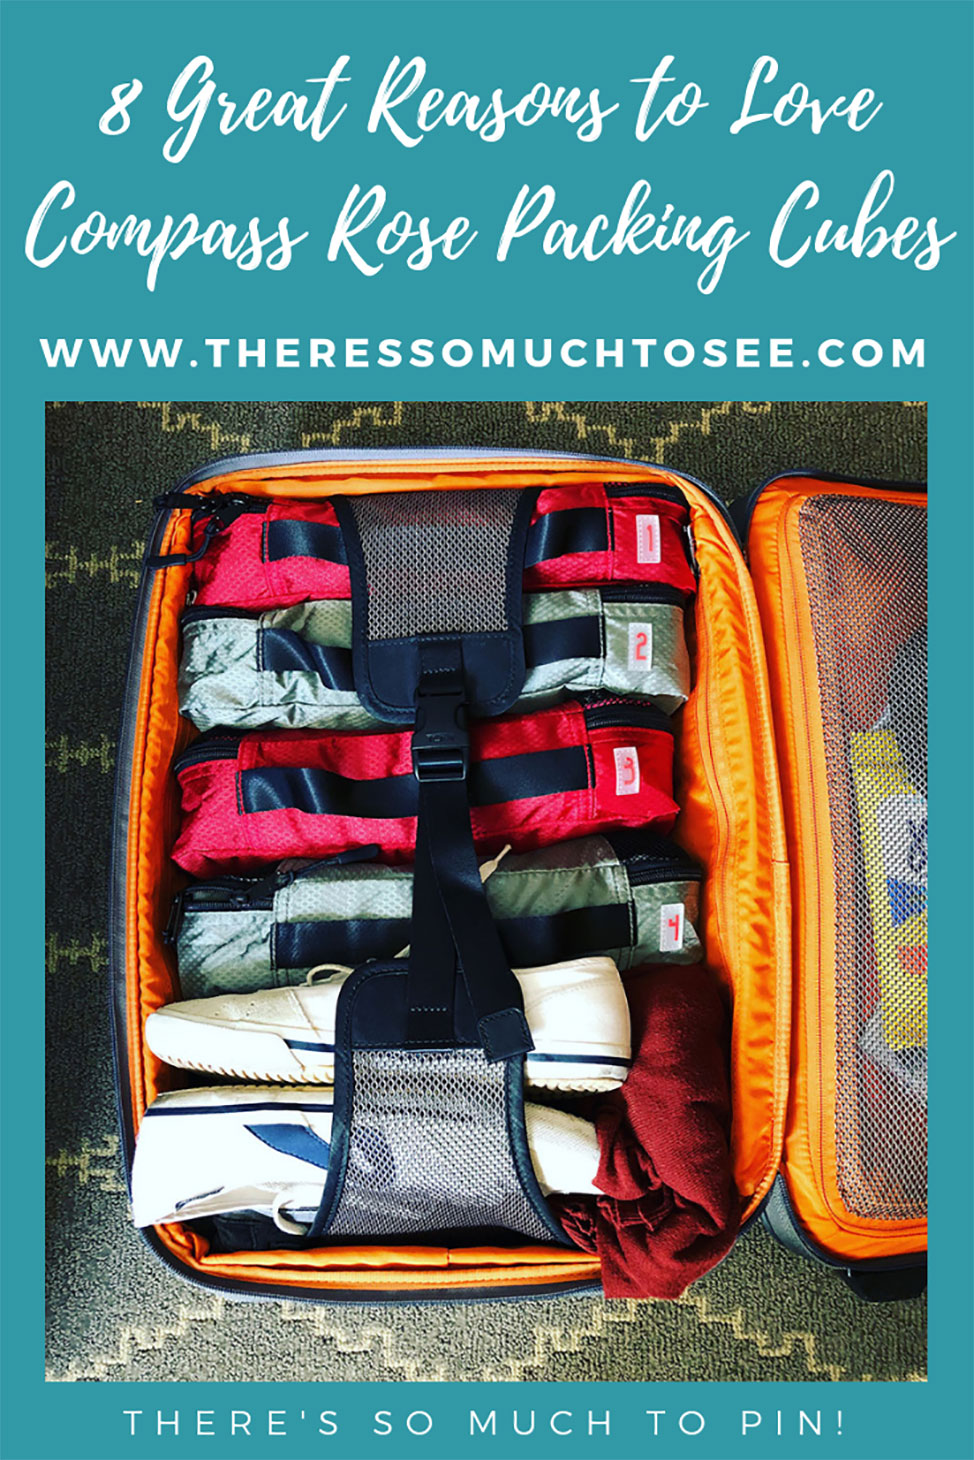 Pinnable image of Compass Rose Packing Cubes in a orange Tumi Roll Aboard suitcase